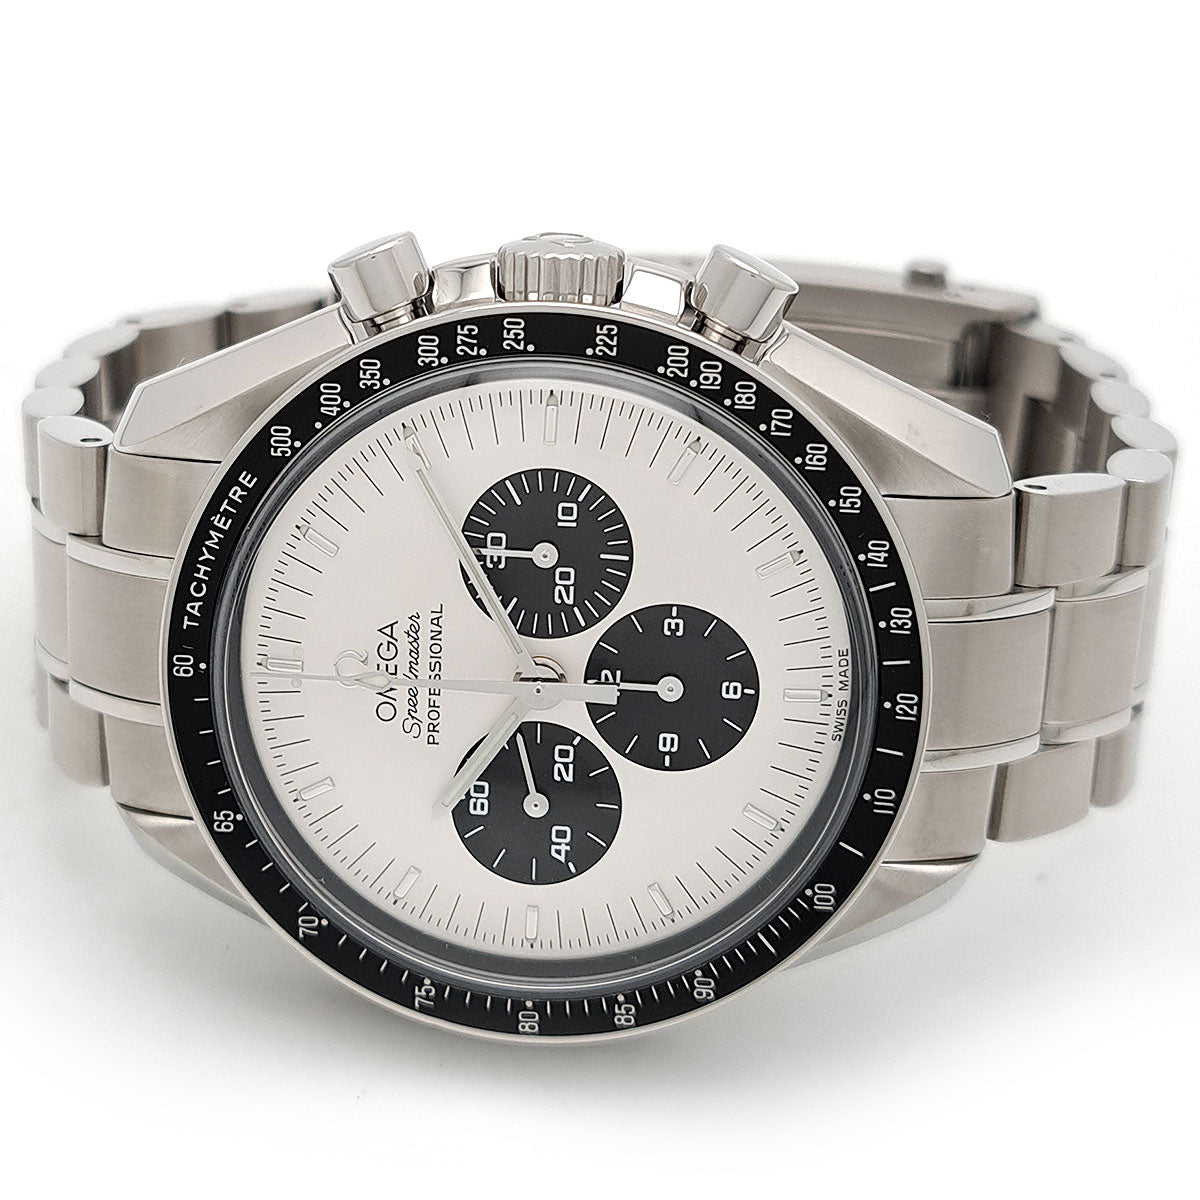 Omega Speedmaster Limited Edition for Mitsukoshi, Overhauled by Omega, 3570.31 Men's Manual Watch, Material 3570.31